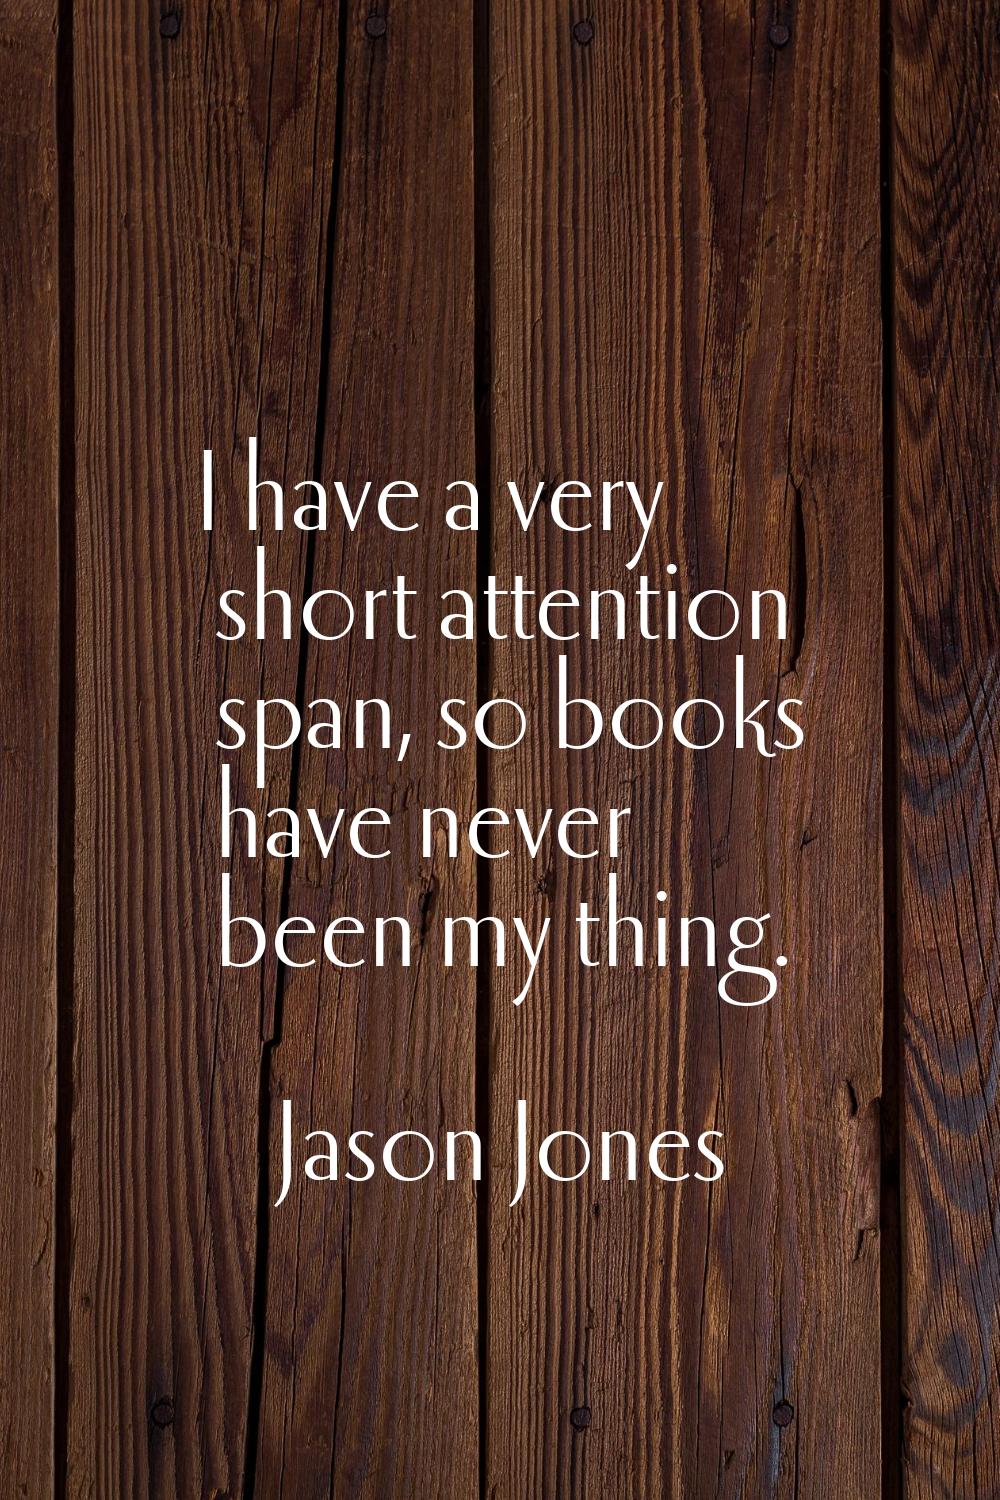 I have a very short attention span, so books have never been my thing.